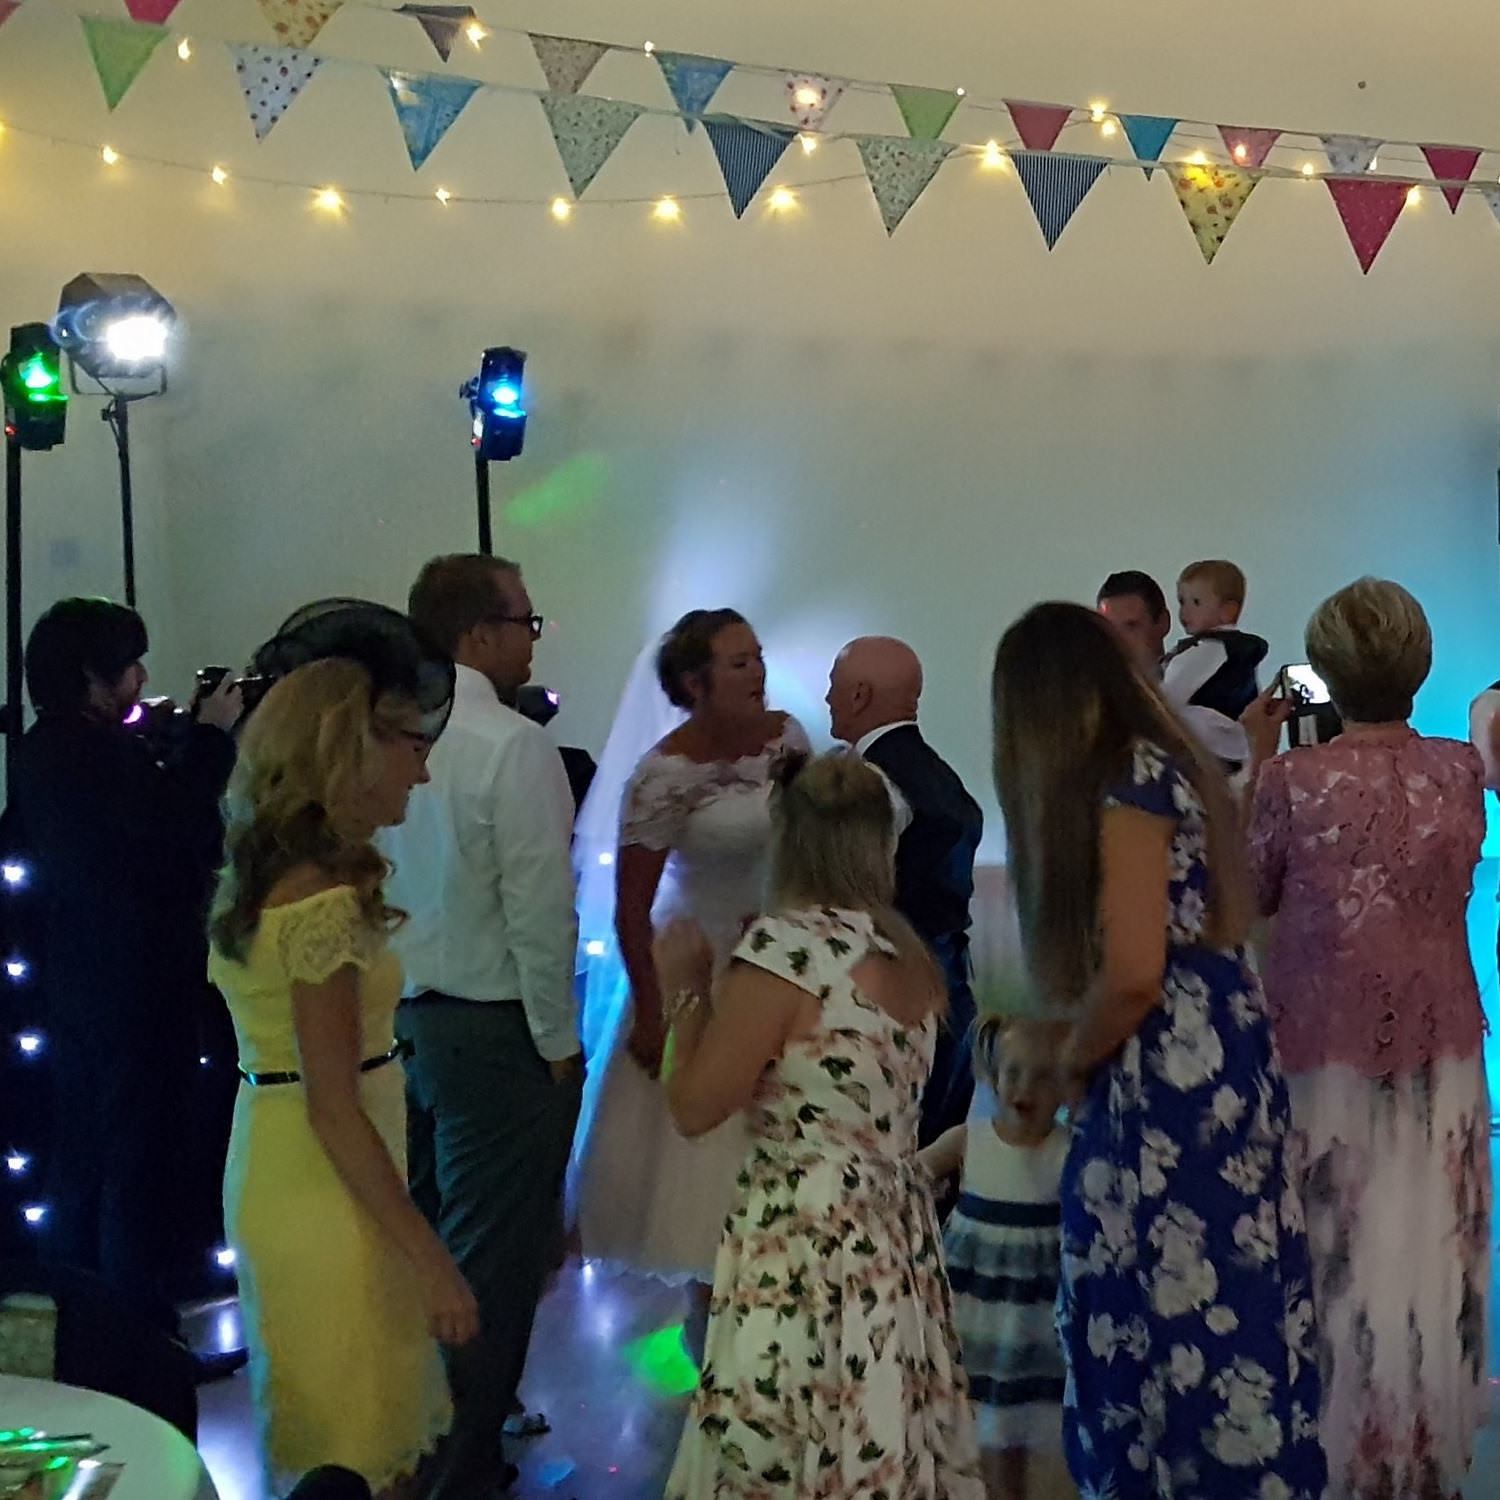 Wedding guests in summer clothes and multi-coloured bunting overhead surround bride dancing in front of disco lightshow.